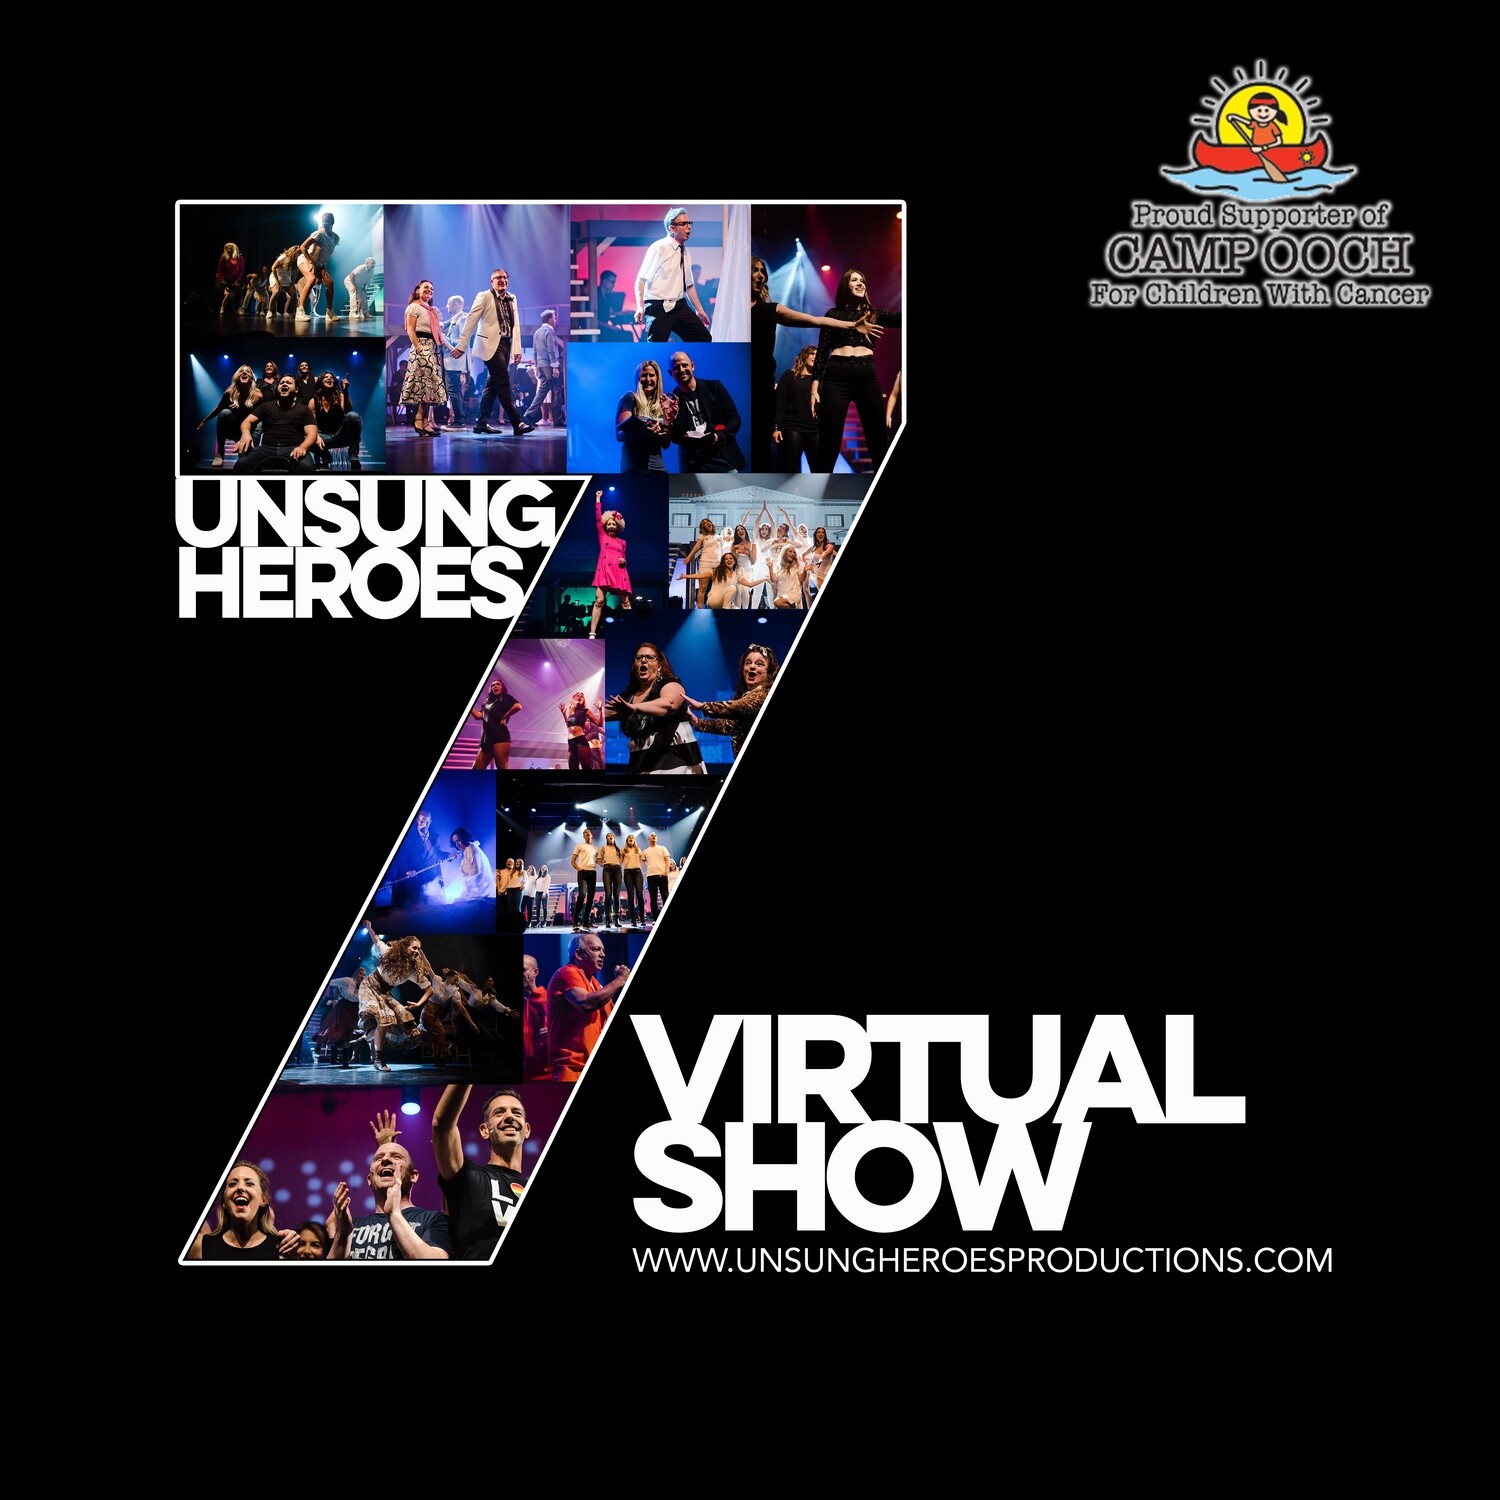 Unsung Heroes - The Virtual Show